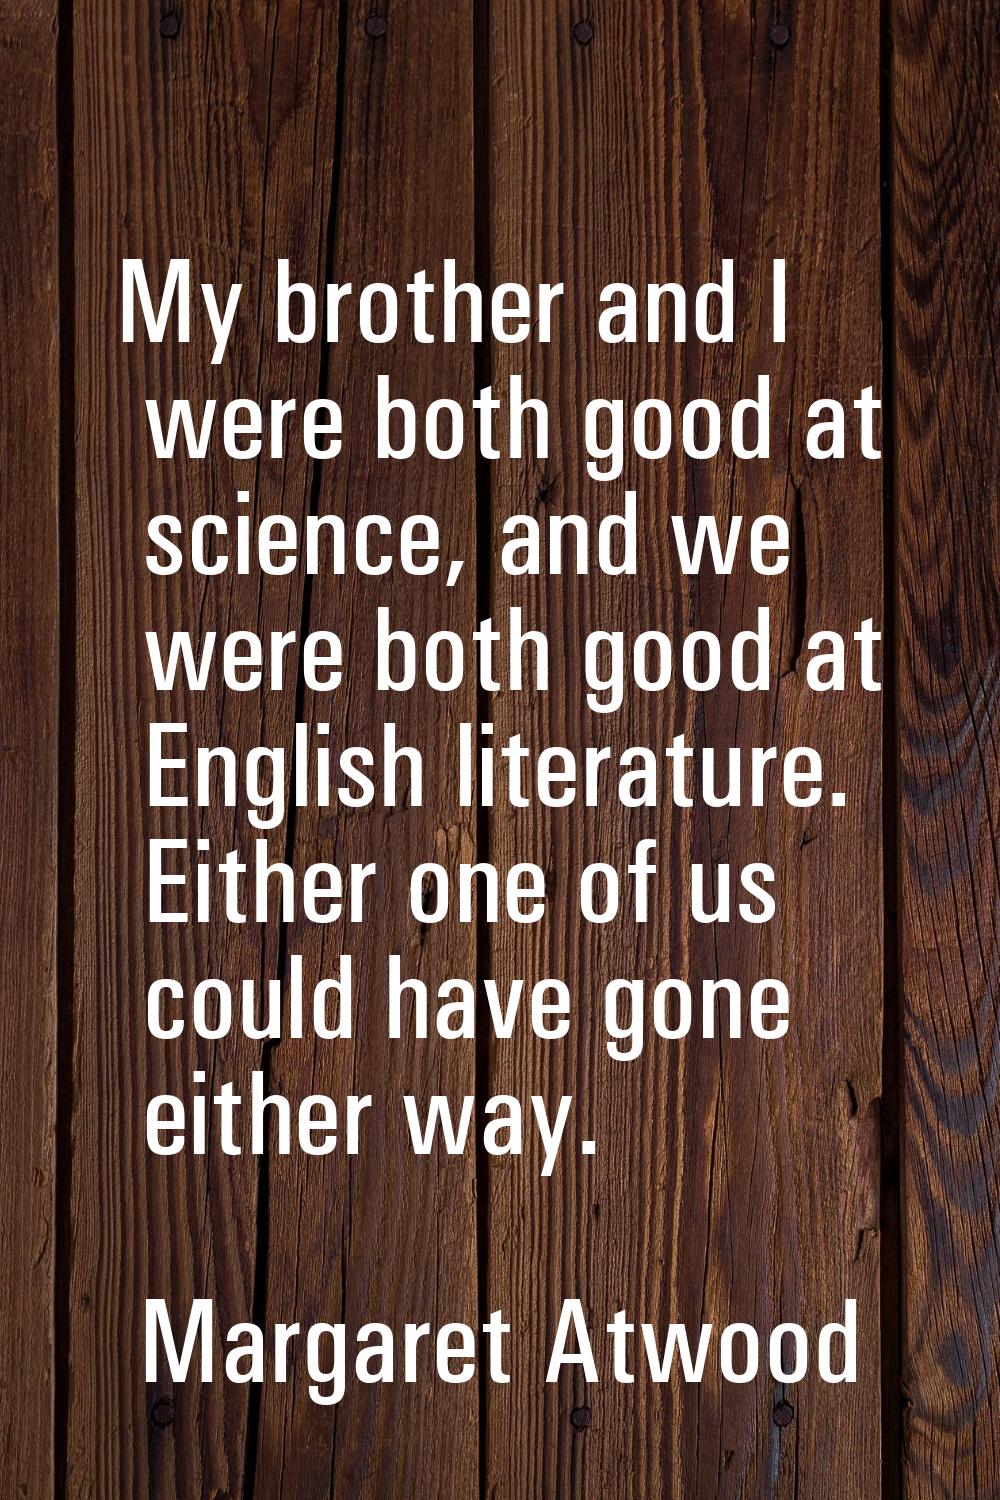 My brother and I were both good at science, and we were both good at English literature. Either one